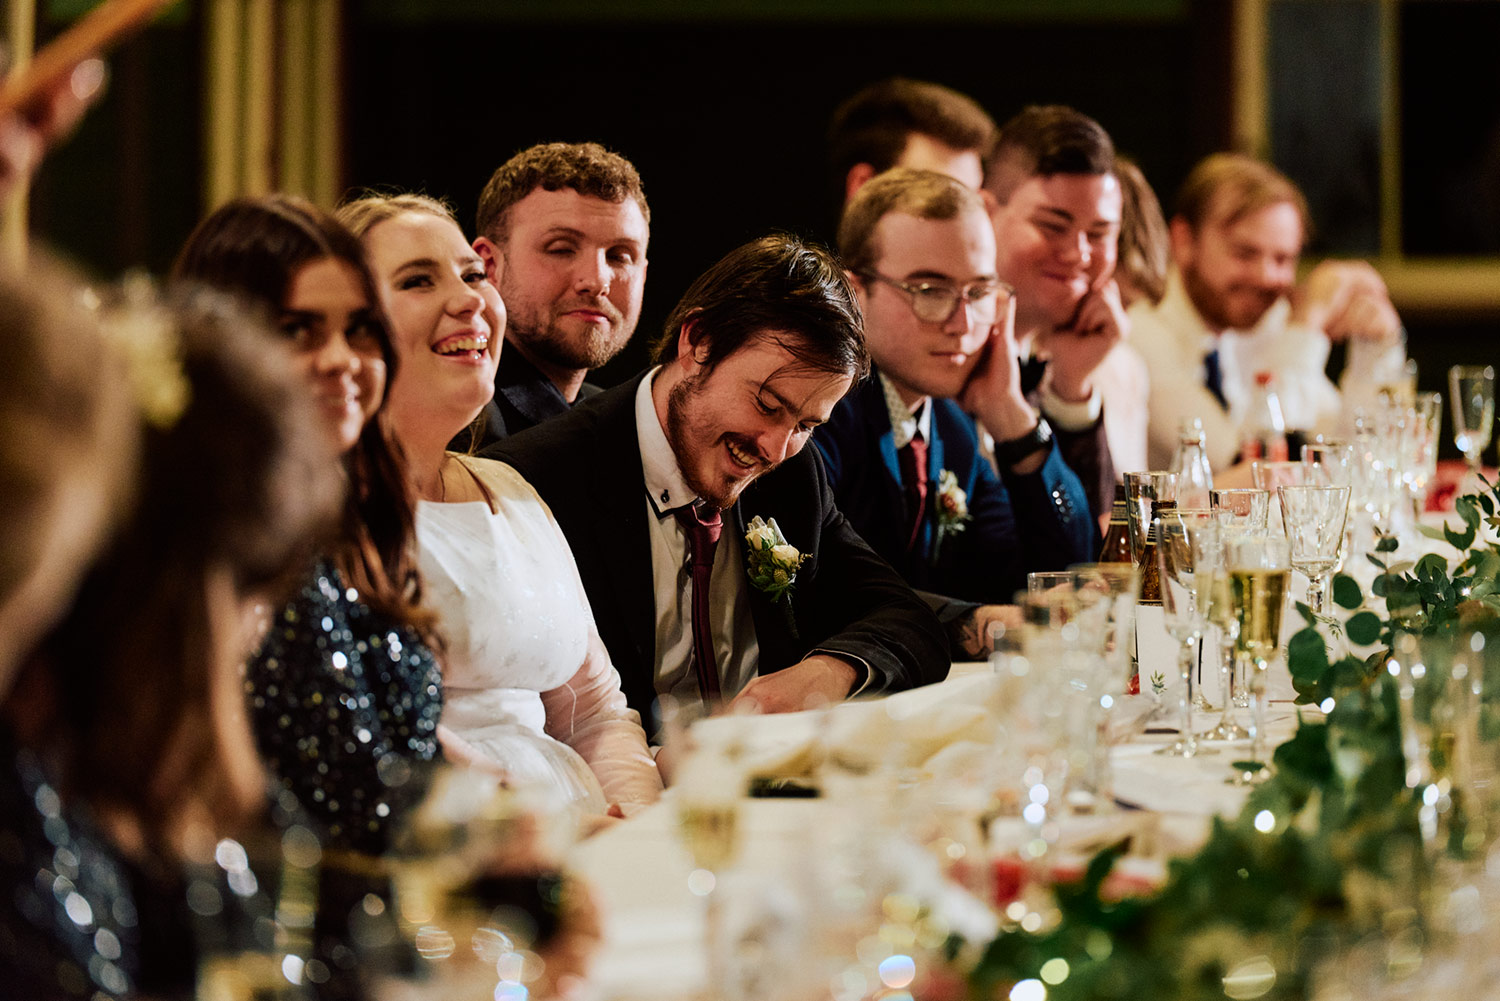 Laughter at wedding speeches